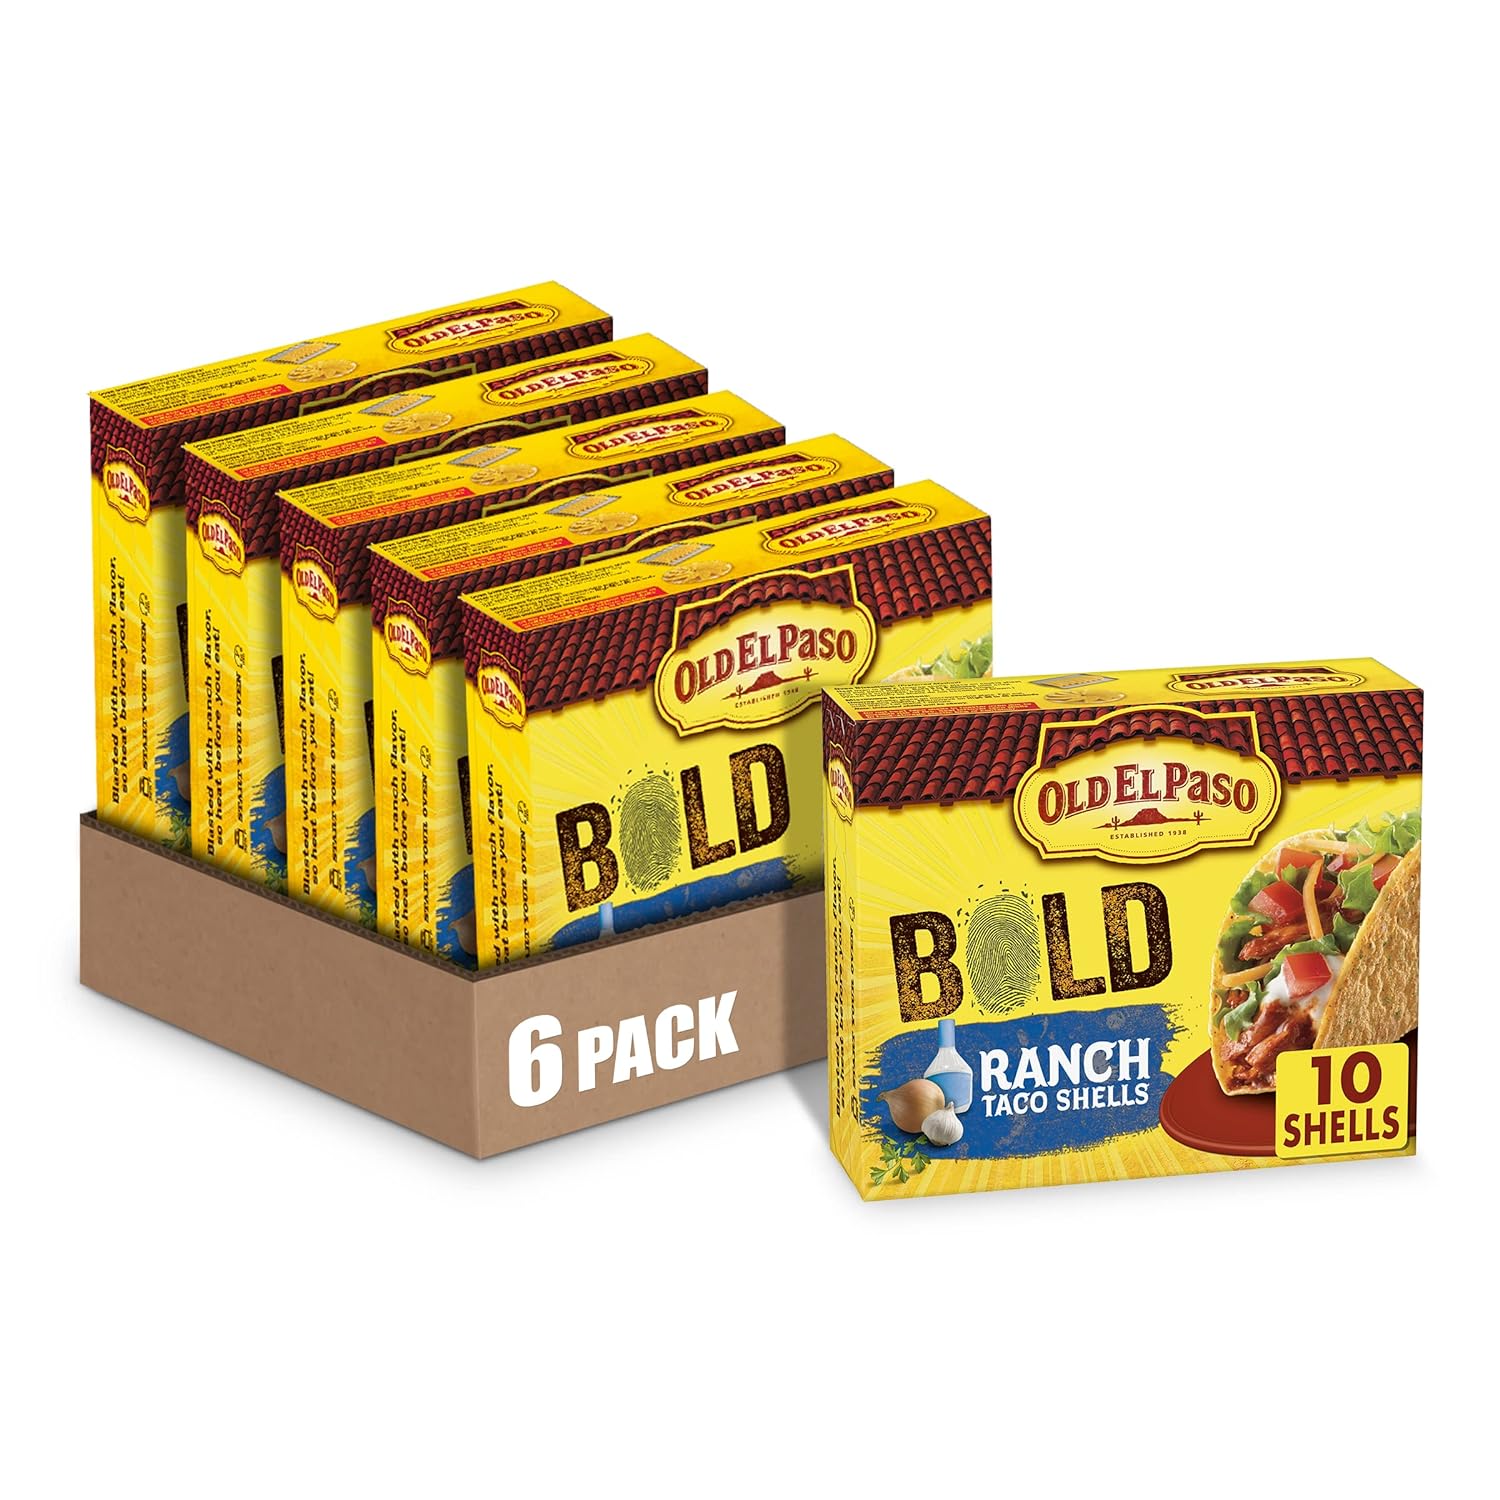 Old El Paso Stand 'N Stuff Bold Ranch Flavored Taco Shells, 10-count (Pack of 6)